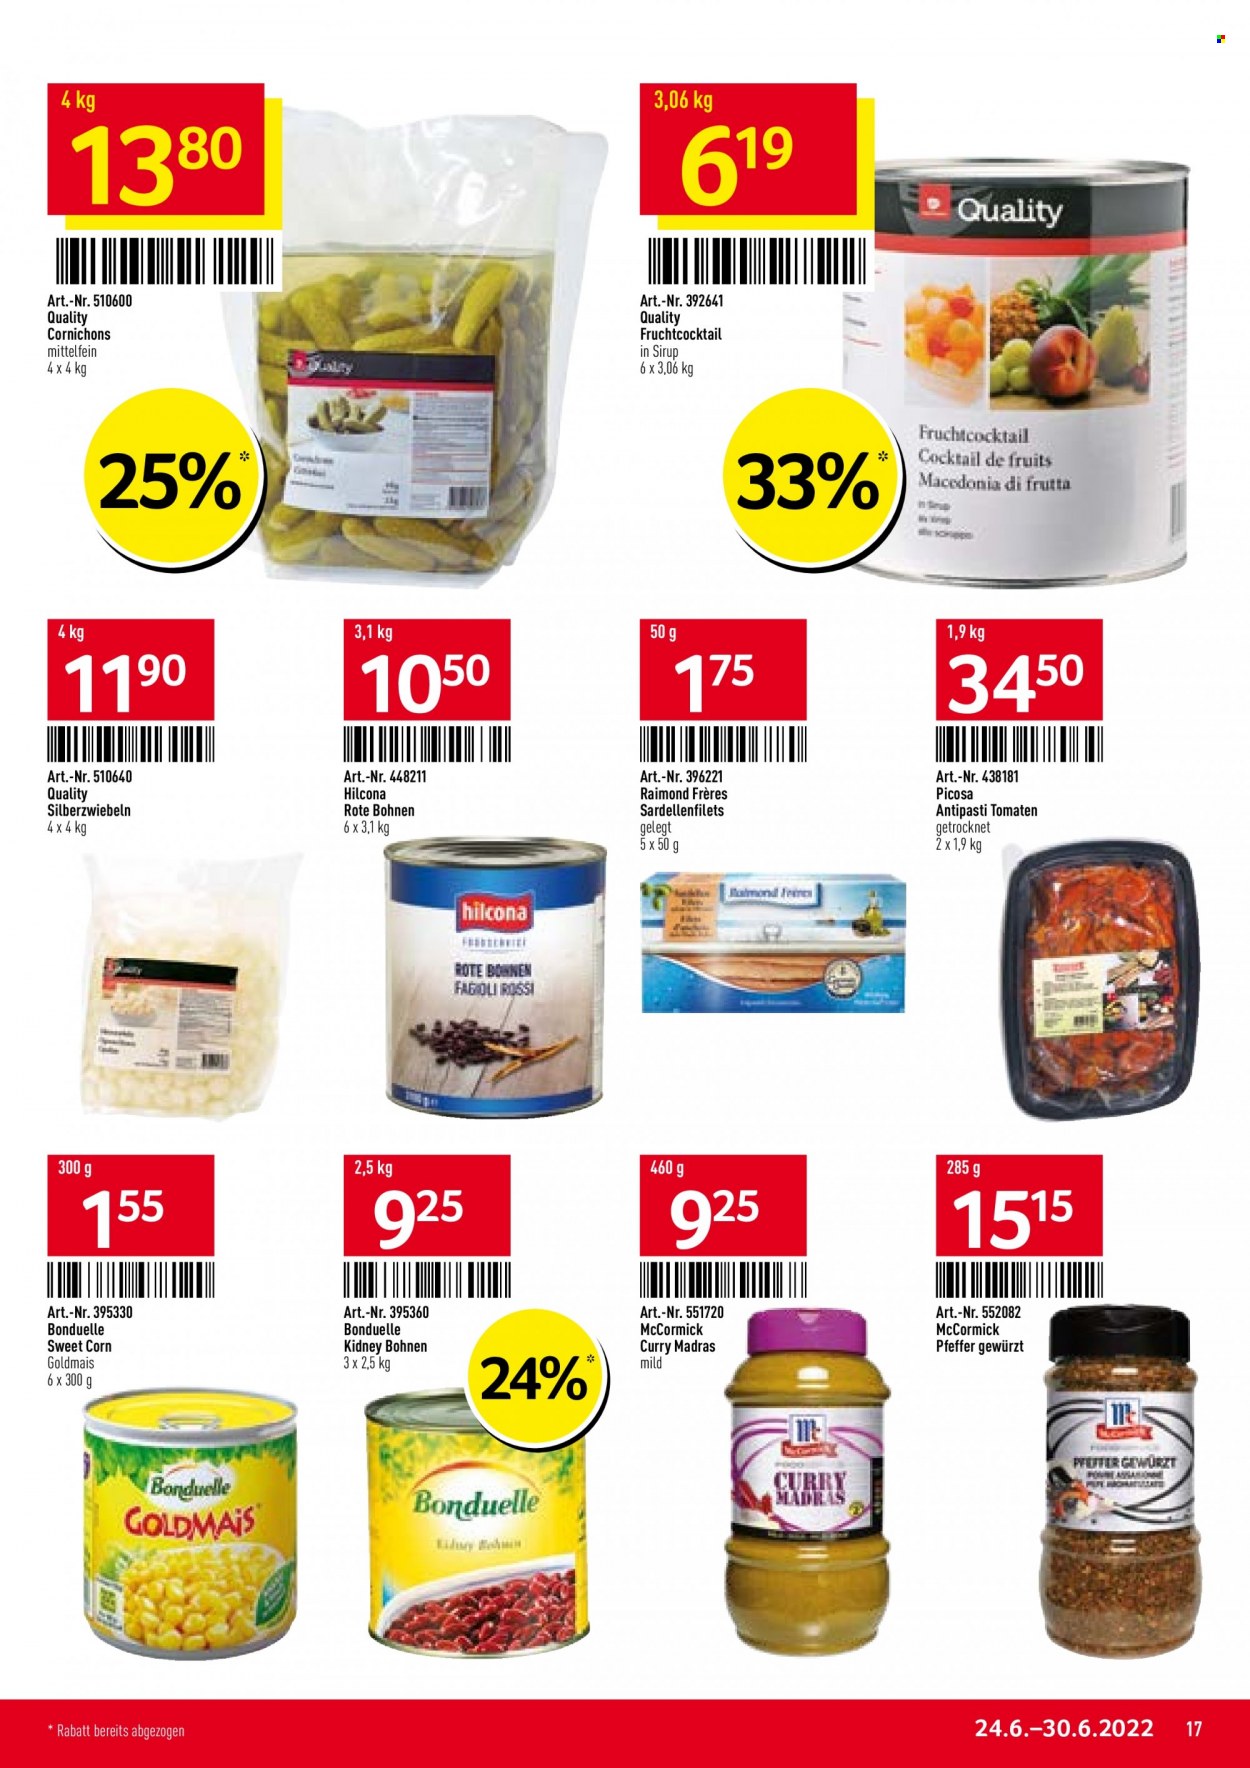 Catalogue TransGourmet - 24.6.2022 - 30.6.2022. Page 17.